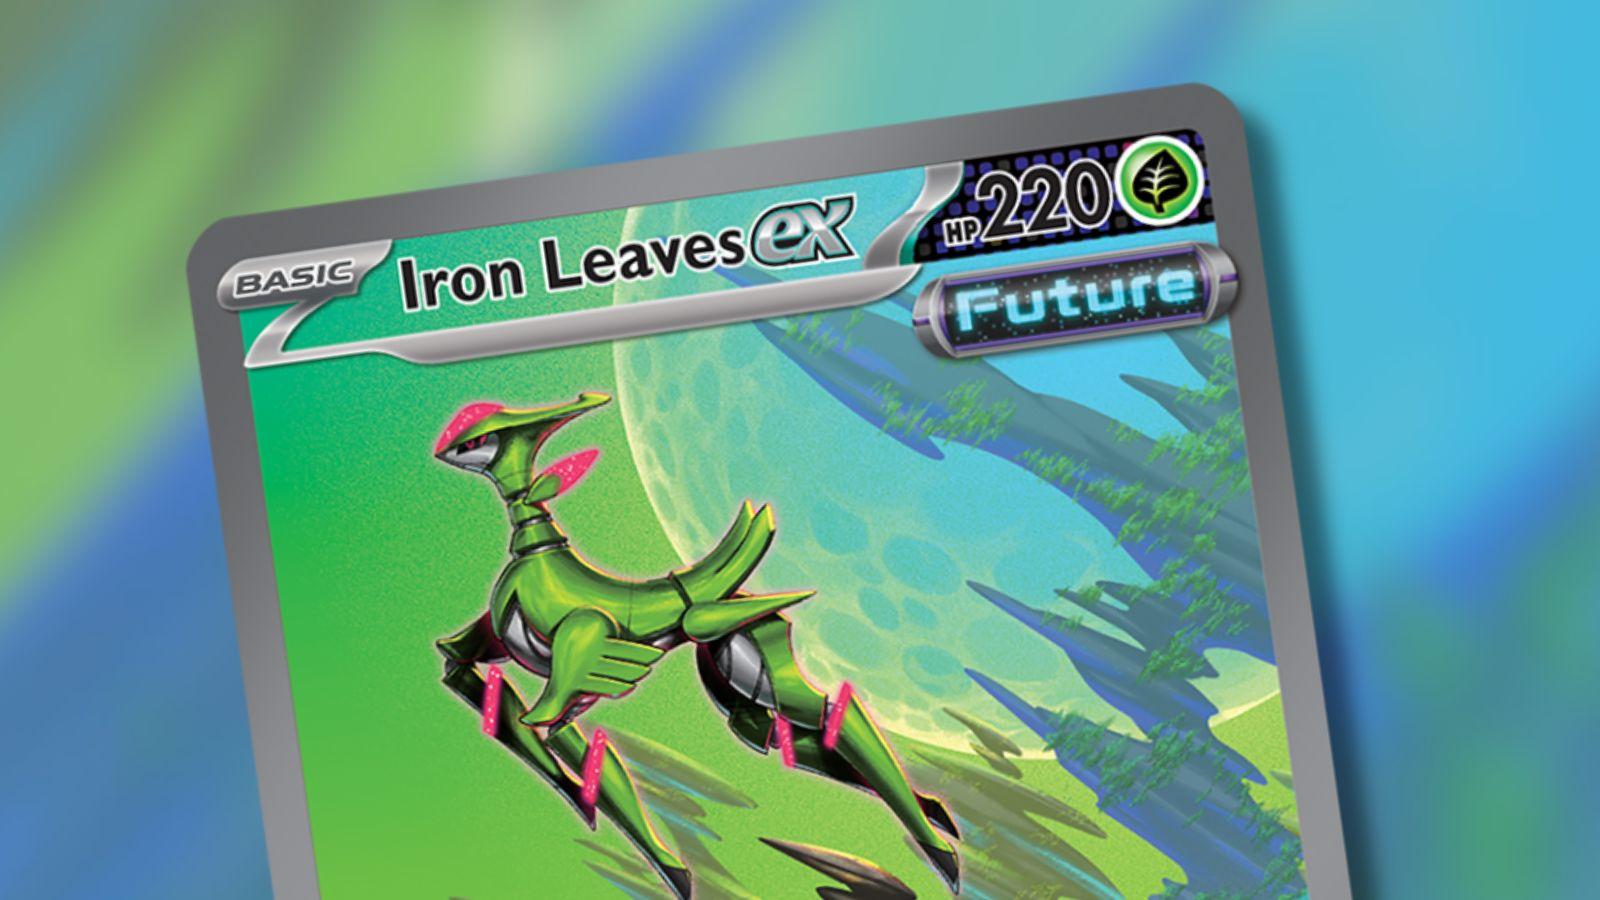 Iron Leaves ex card with blurred background.